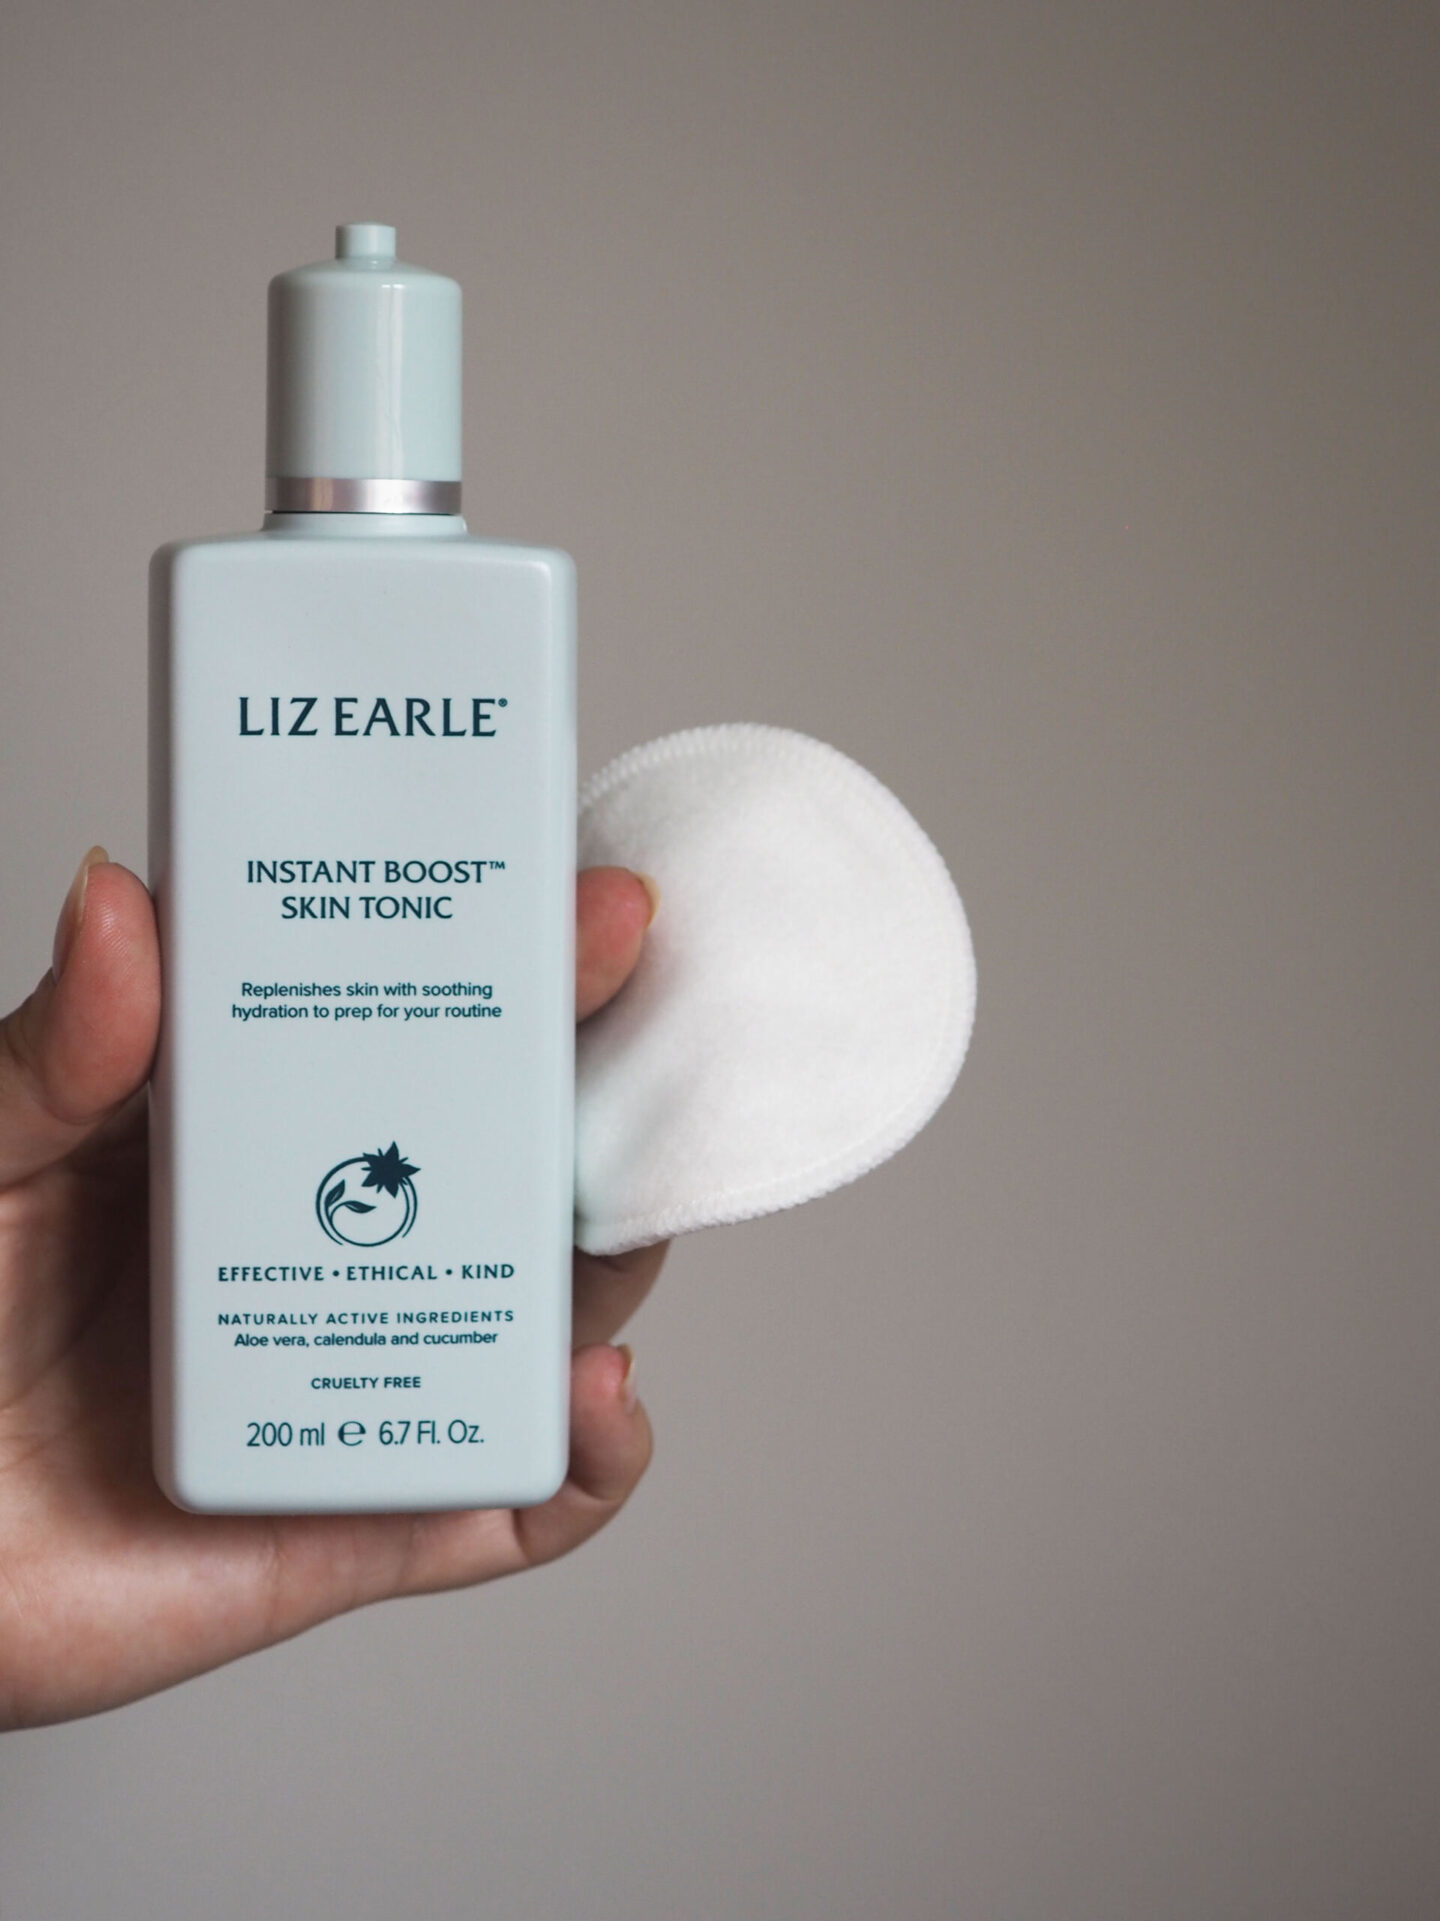 Liz Earle instant boost skin tonic review